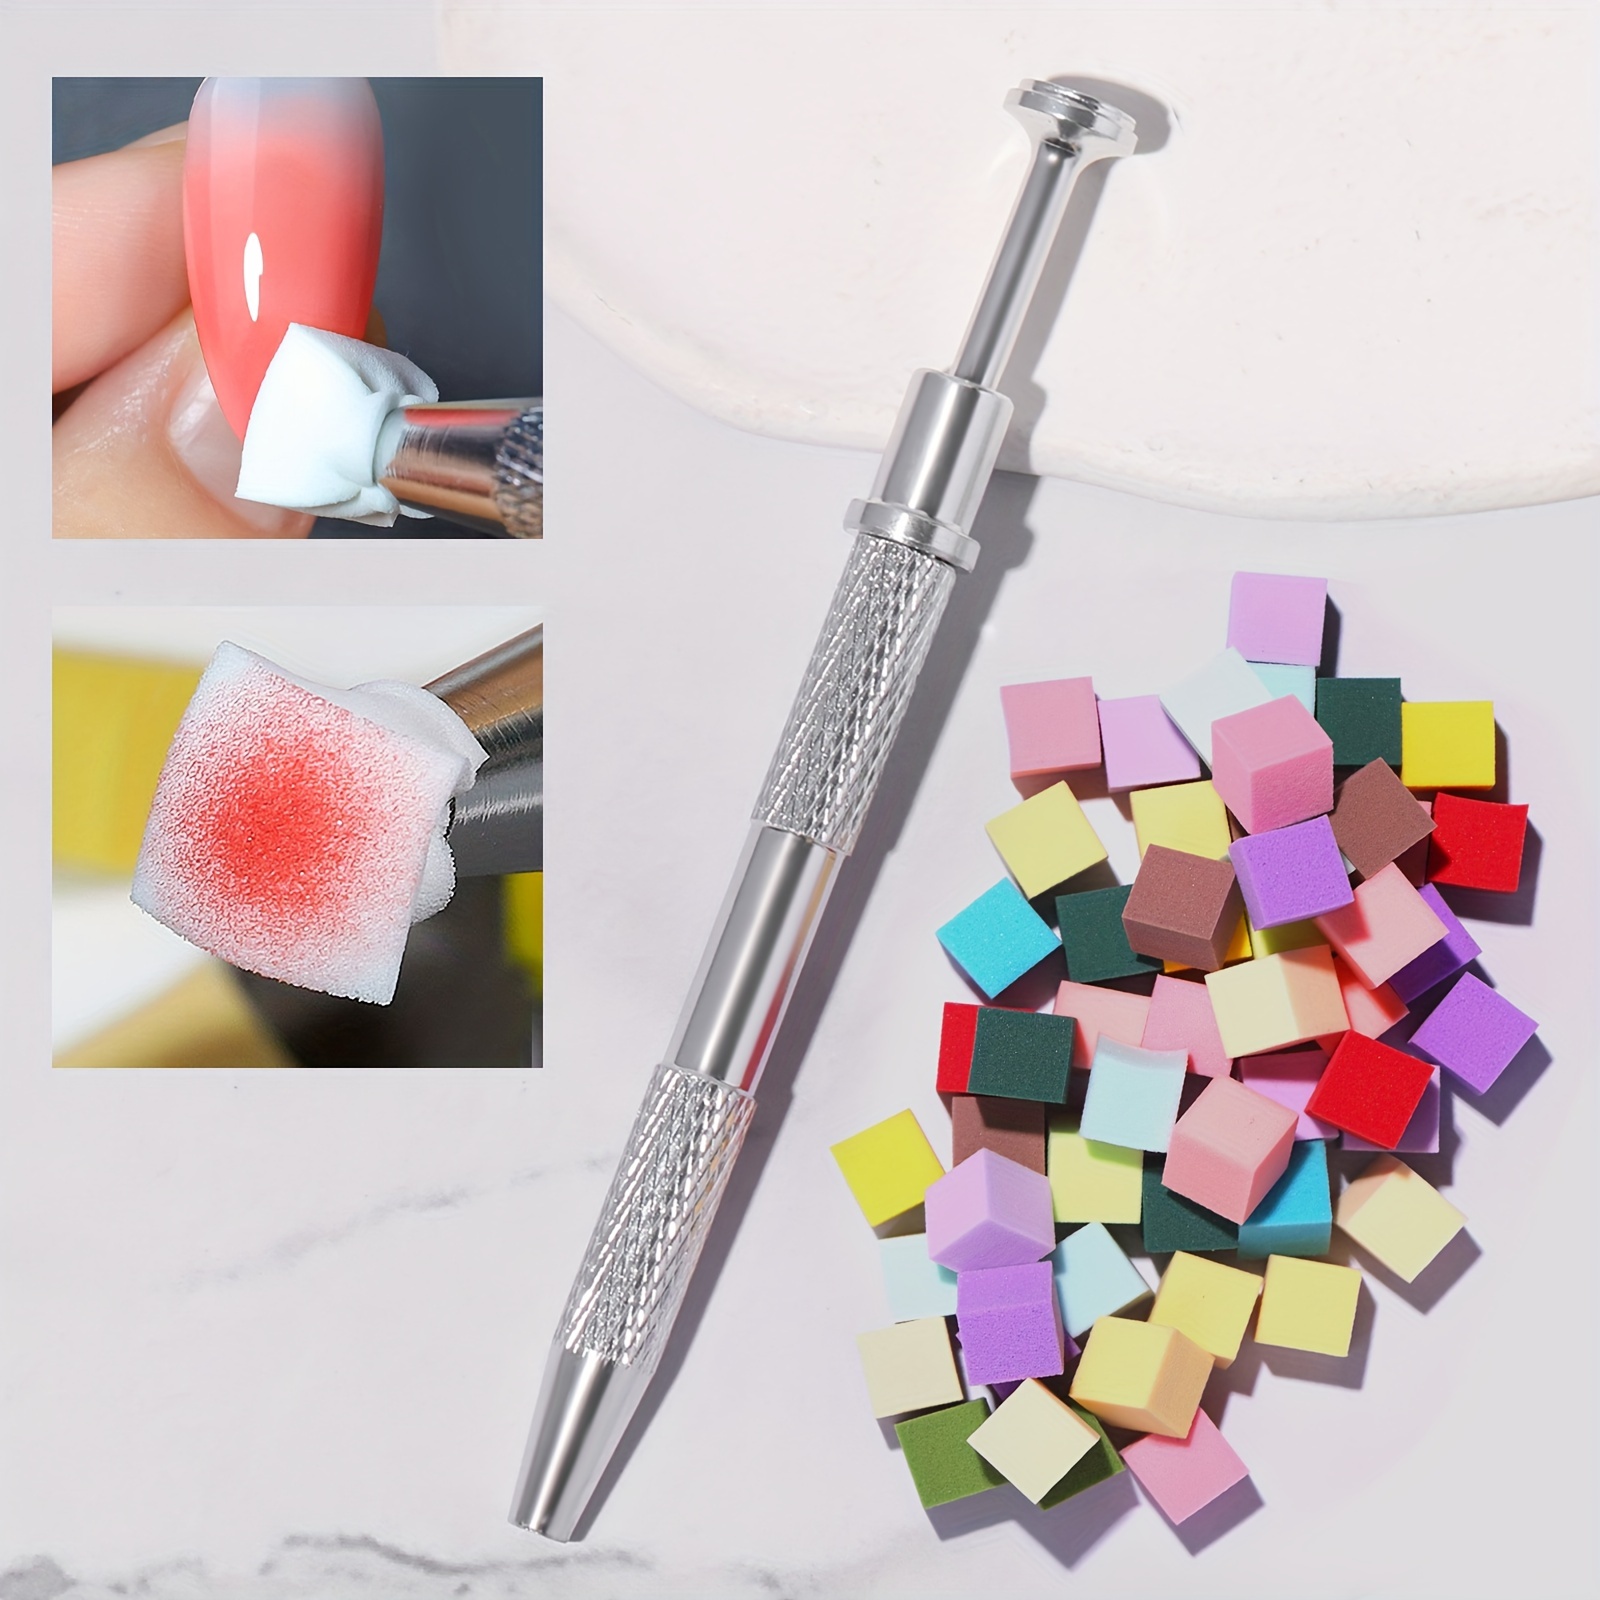 

4-in-1 Nail Art Sponge Pen Set, Square Gradient Stamping Sponge, Multicolor Fade Nail Buffers, Dual-end 4 Claw Pen Design, Nail Salon Dyeing & Smudging Tool Kit